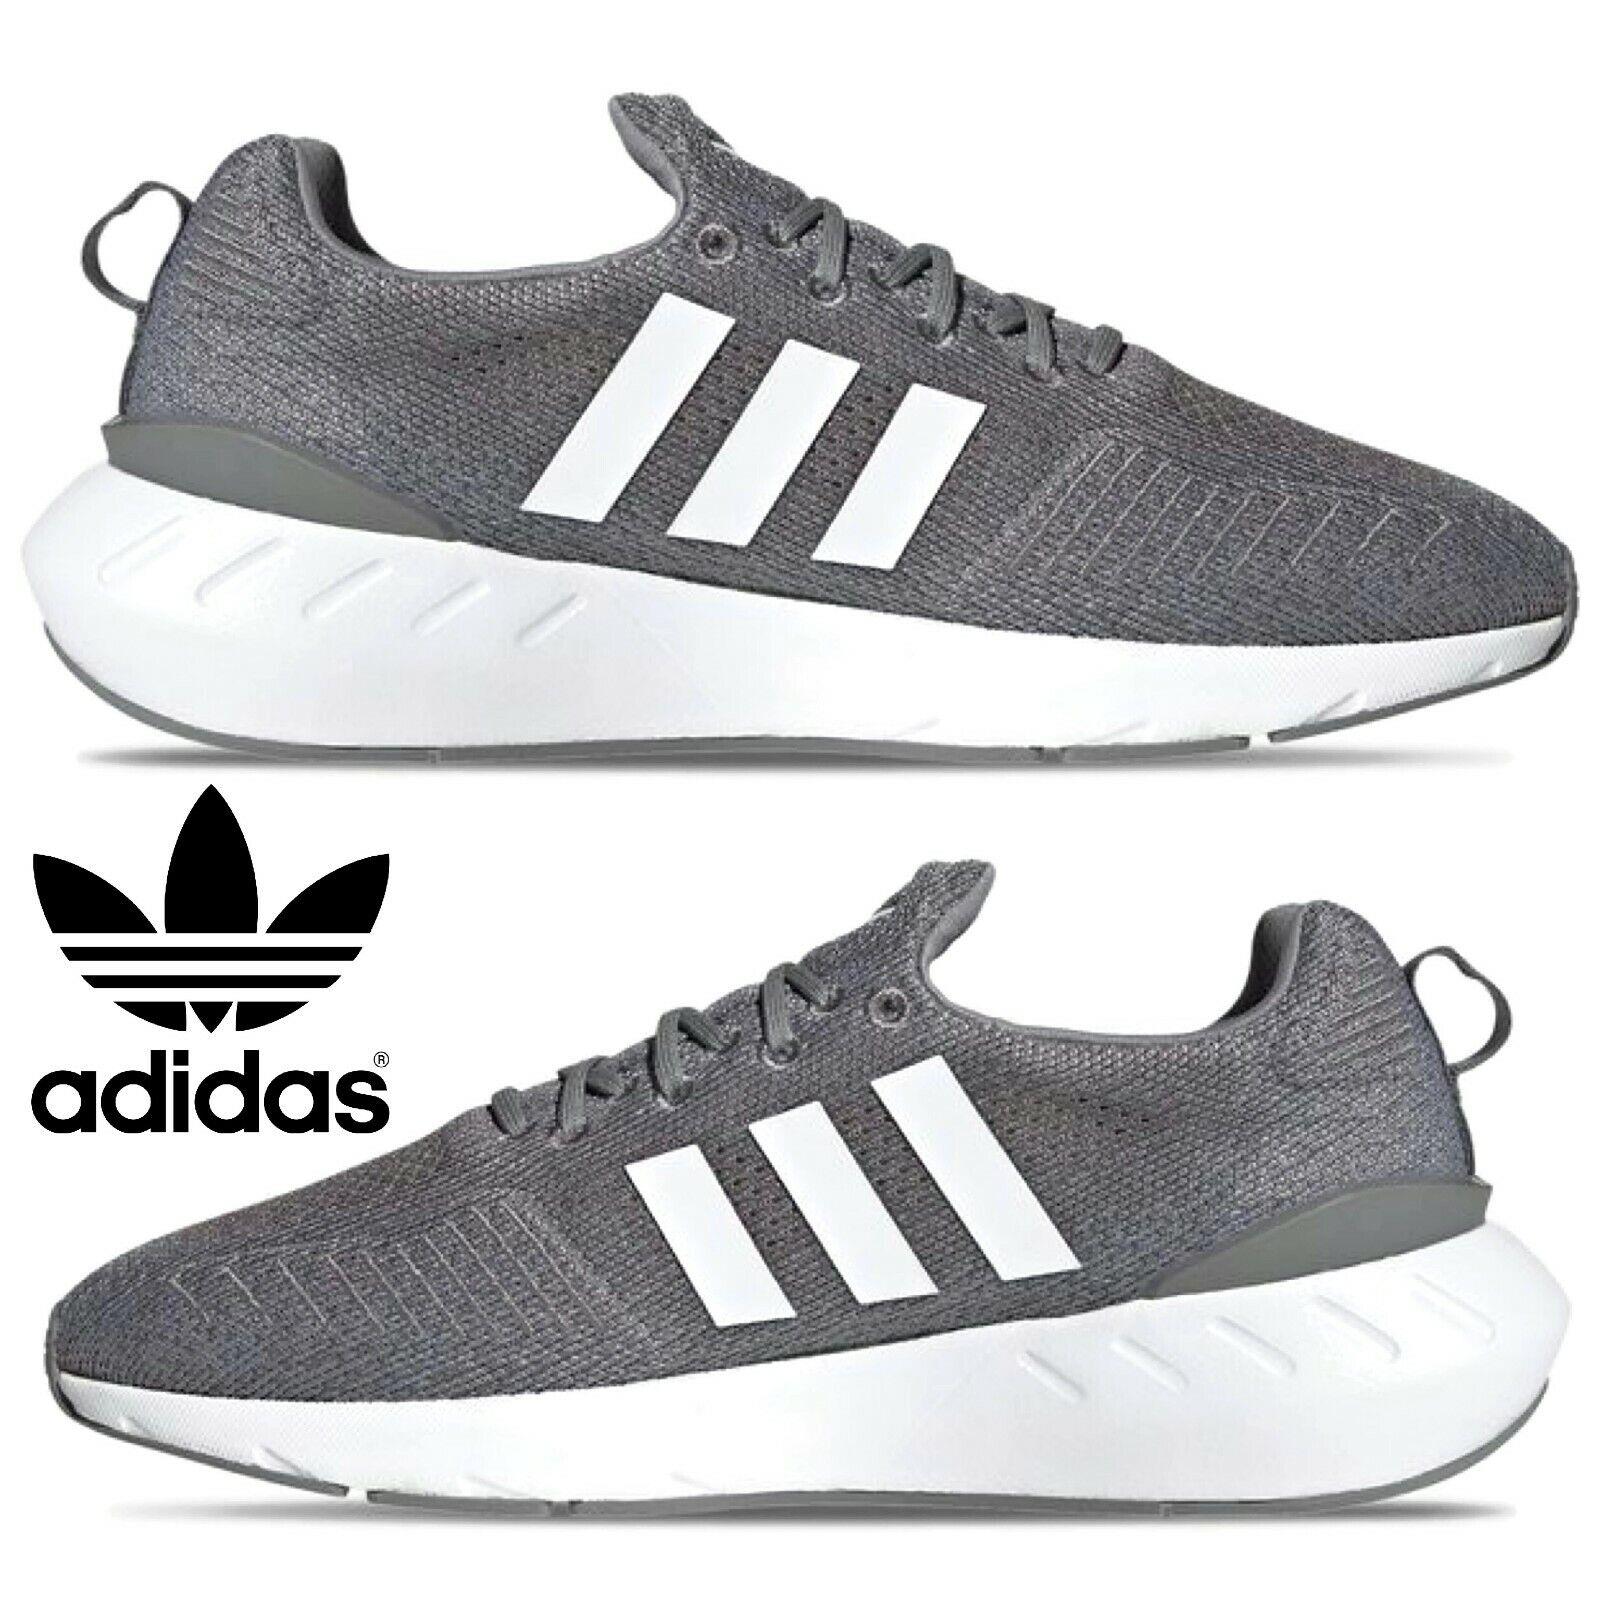 Adidas Originals Swift Run 22 Men`s Sneakers Comfort Casual Shoes Blue White - Gray , Grey/White Manufacturer